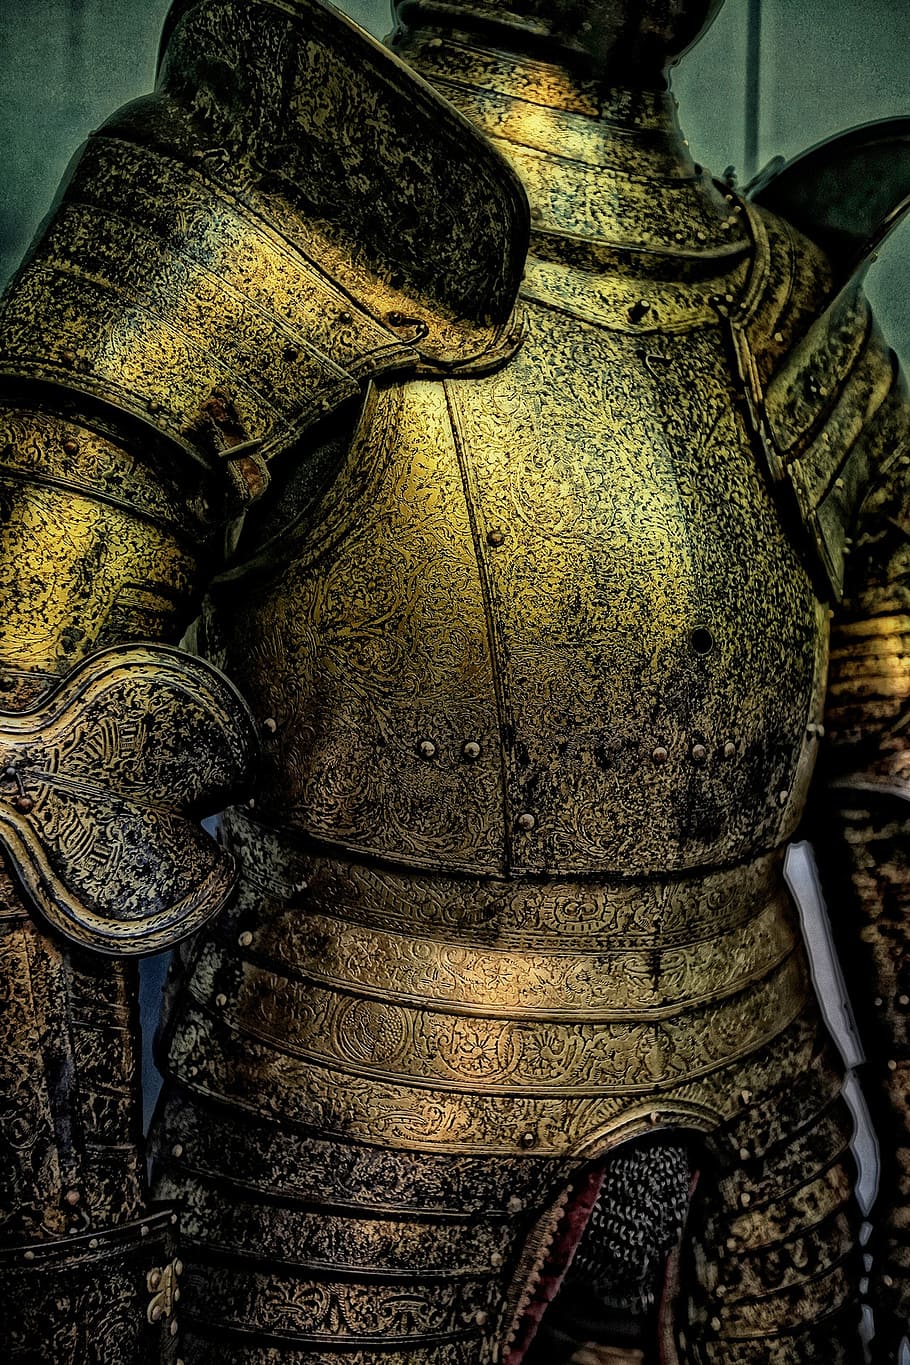 gold knight armor, gray, painted, wall, knights armor, suit of armor, metal, vintage, protection, war